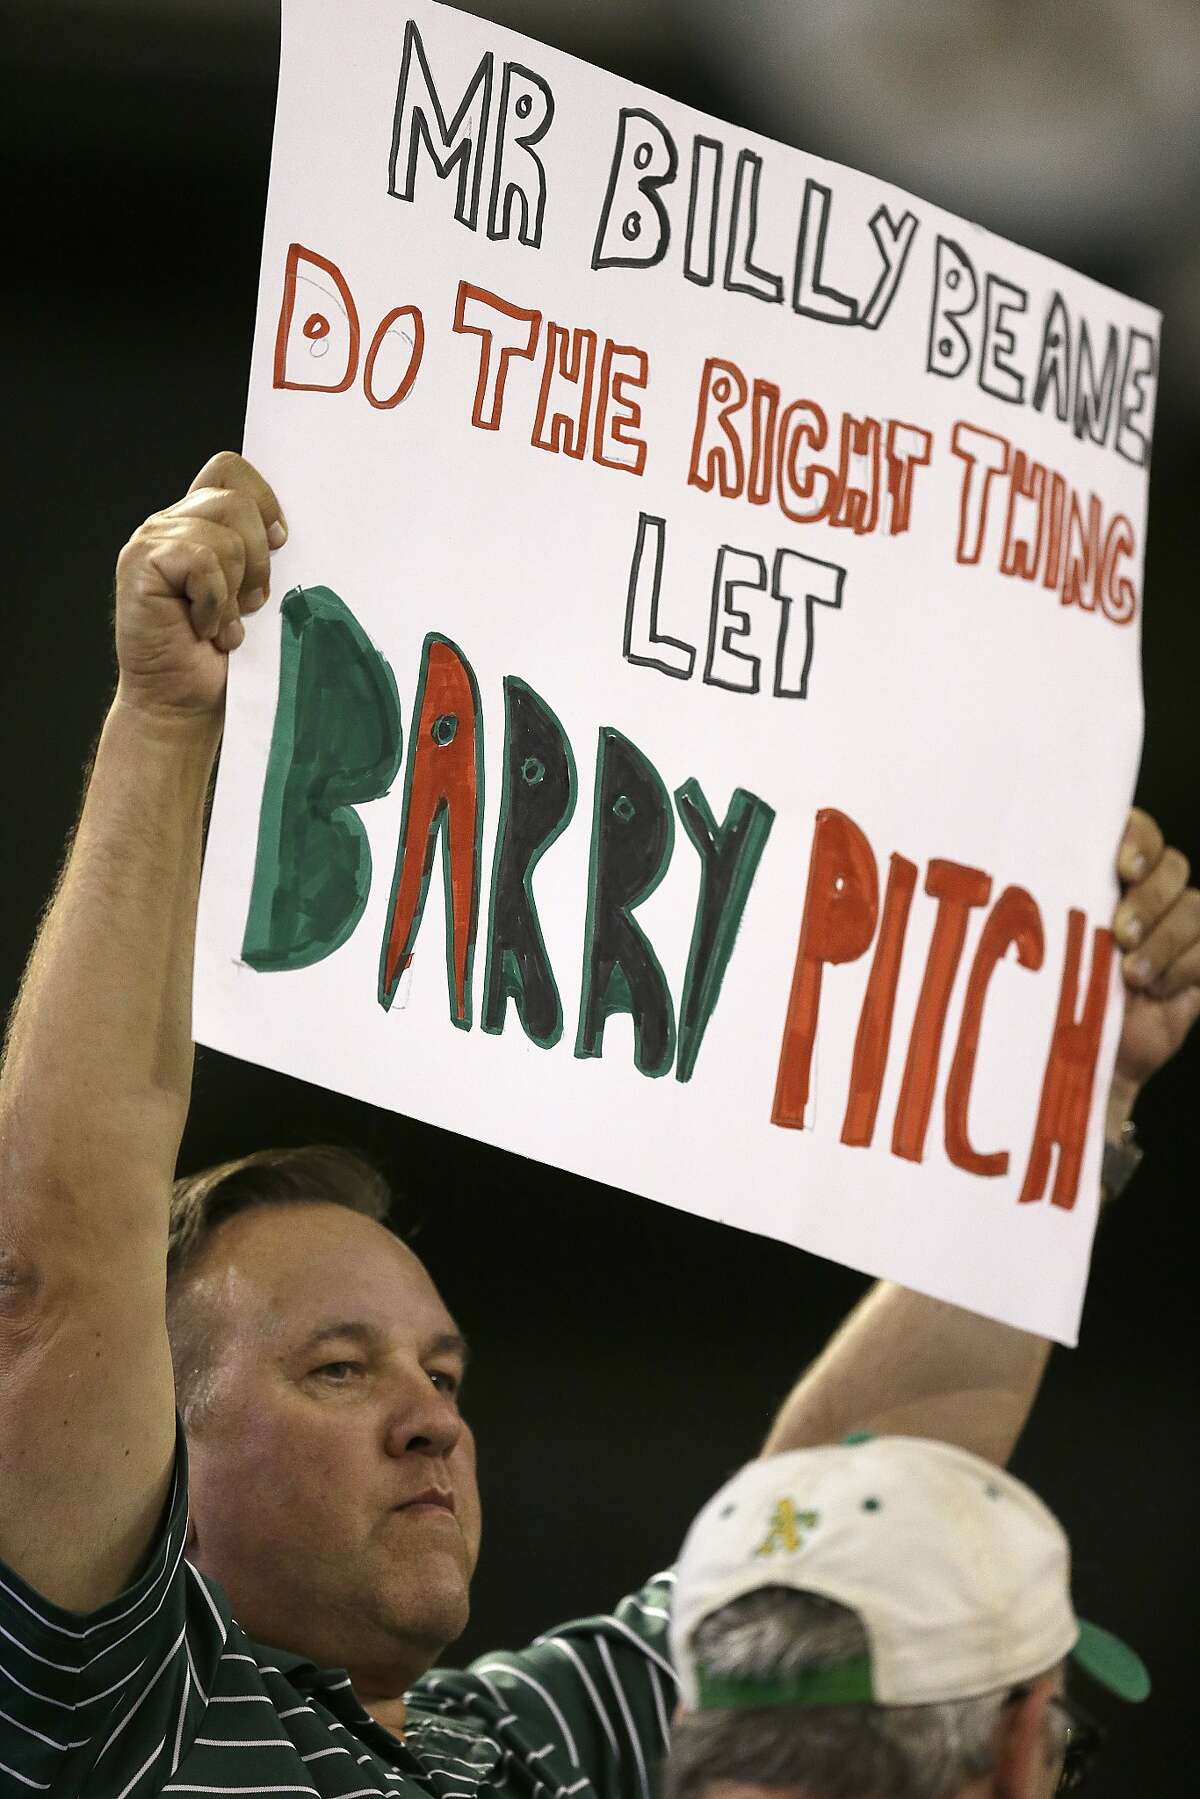 Oakland Athletics fan holds up a sign in reference to pitcher Barry Zito during a baseball game against the Houston Astros Wednesday, Sept. 9, 2015, in Oakland, Calif.